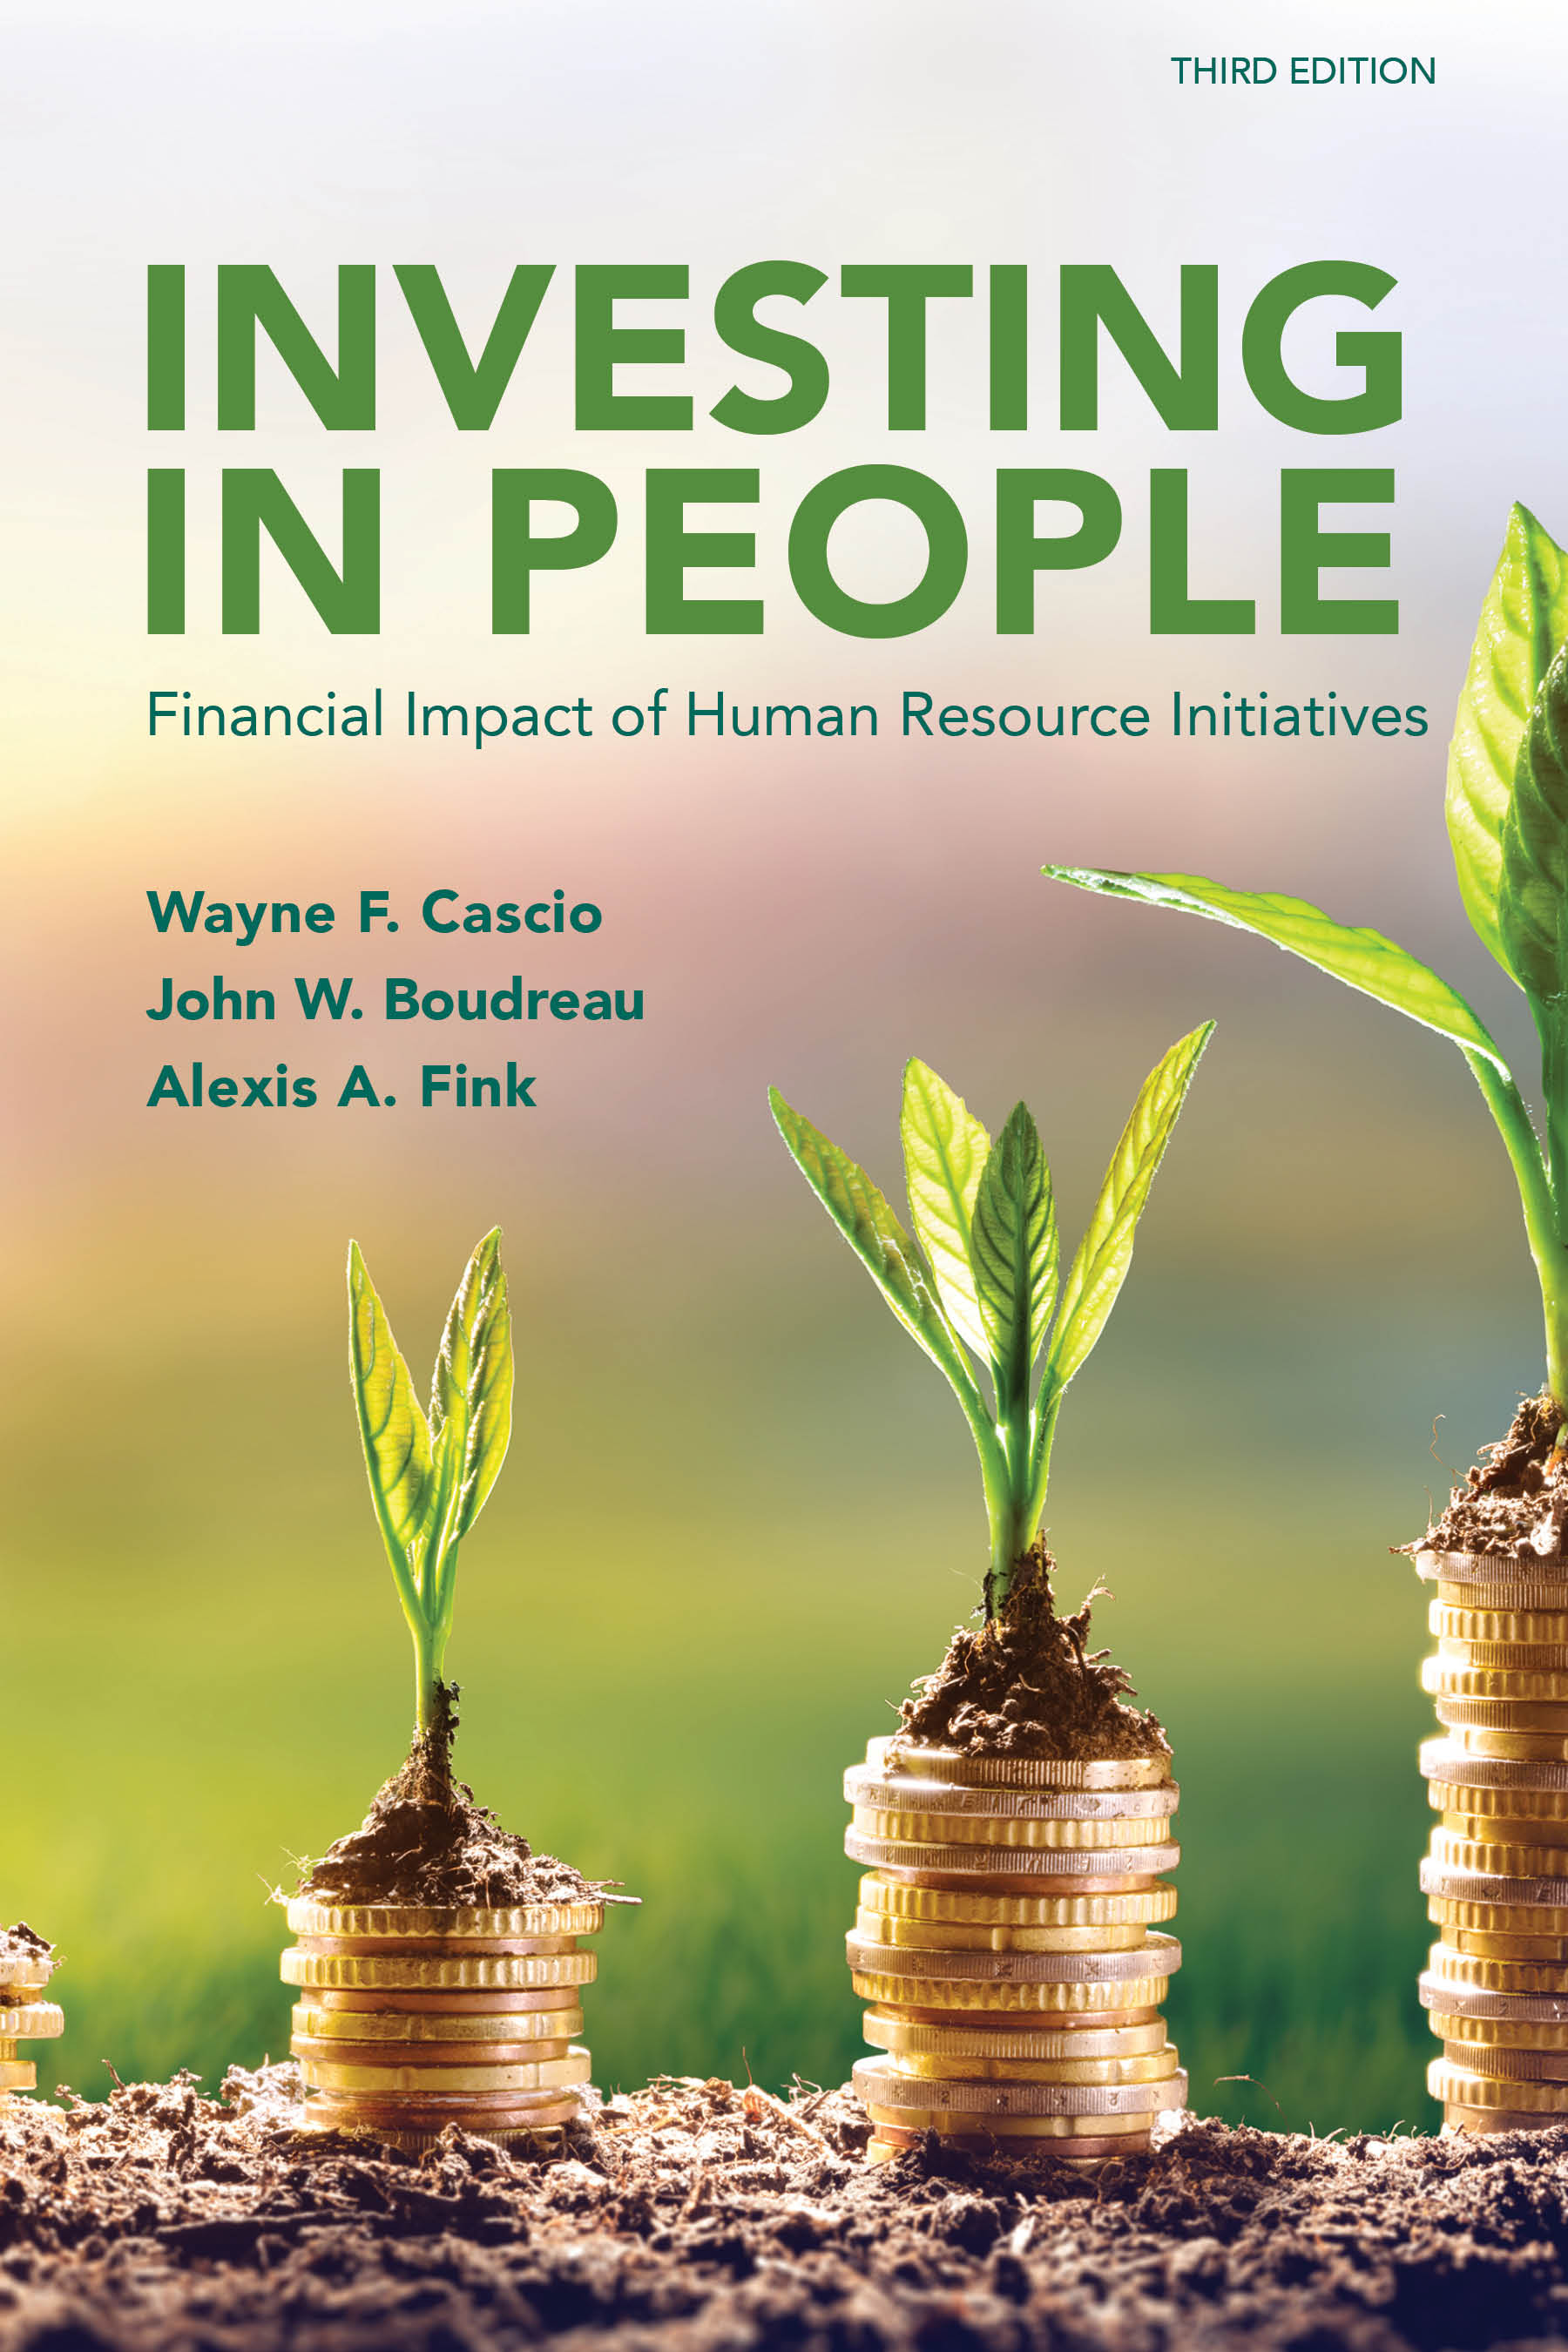 Investing in People bookcover